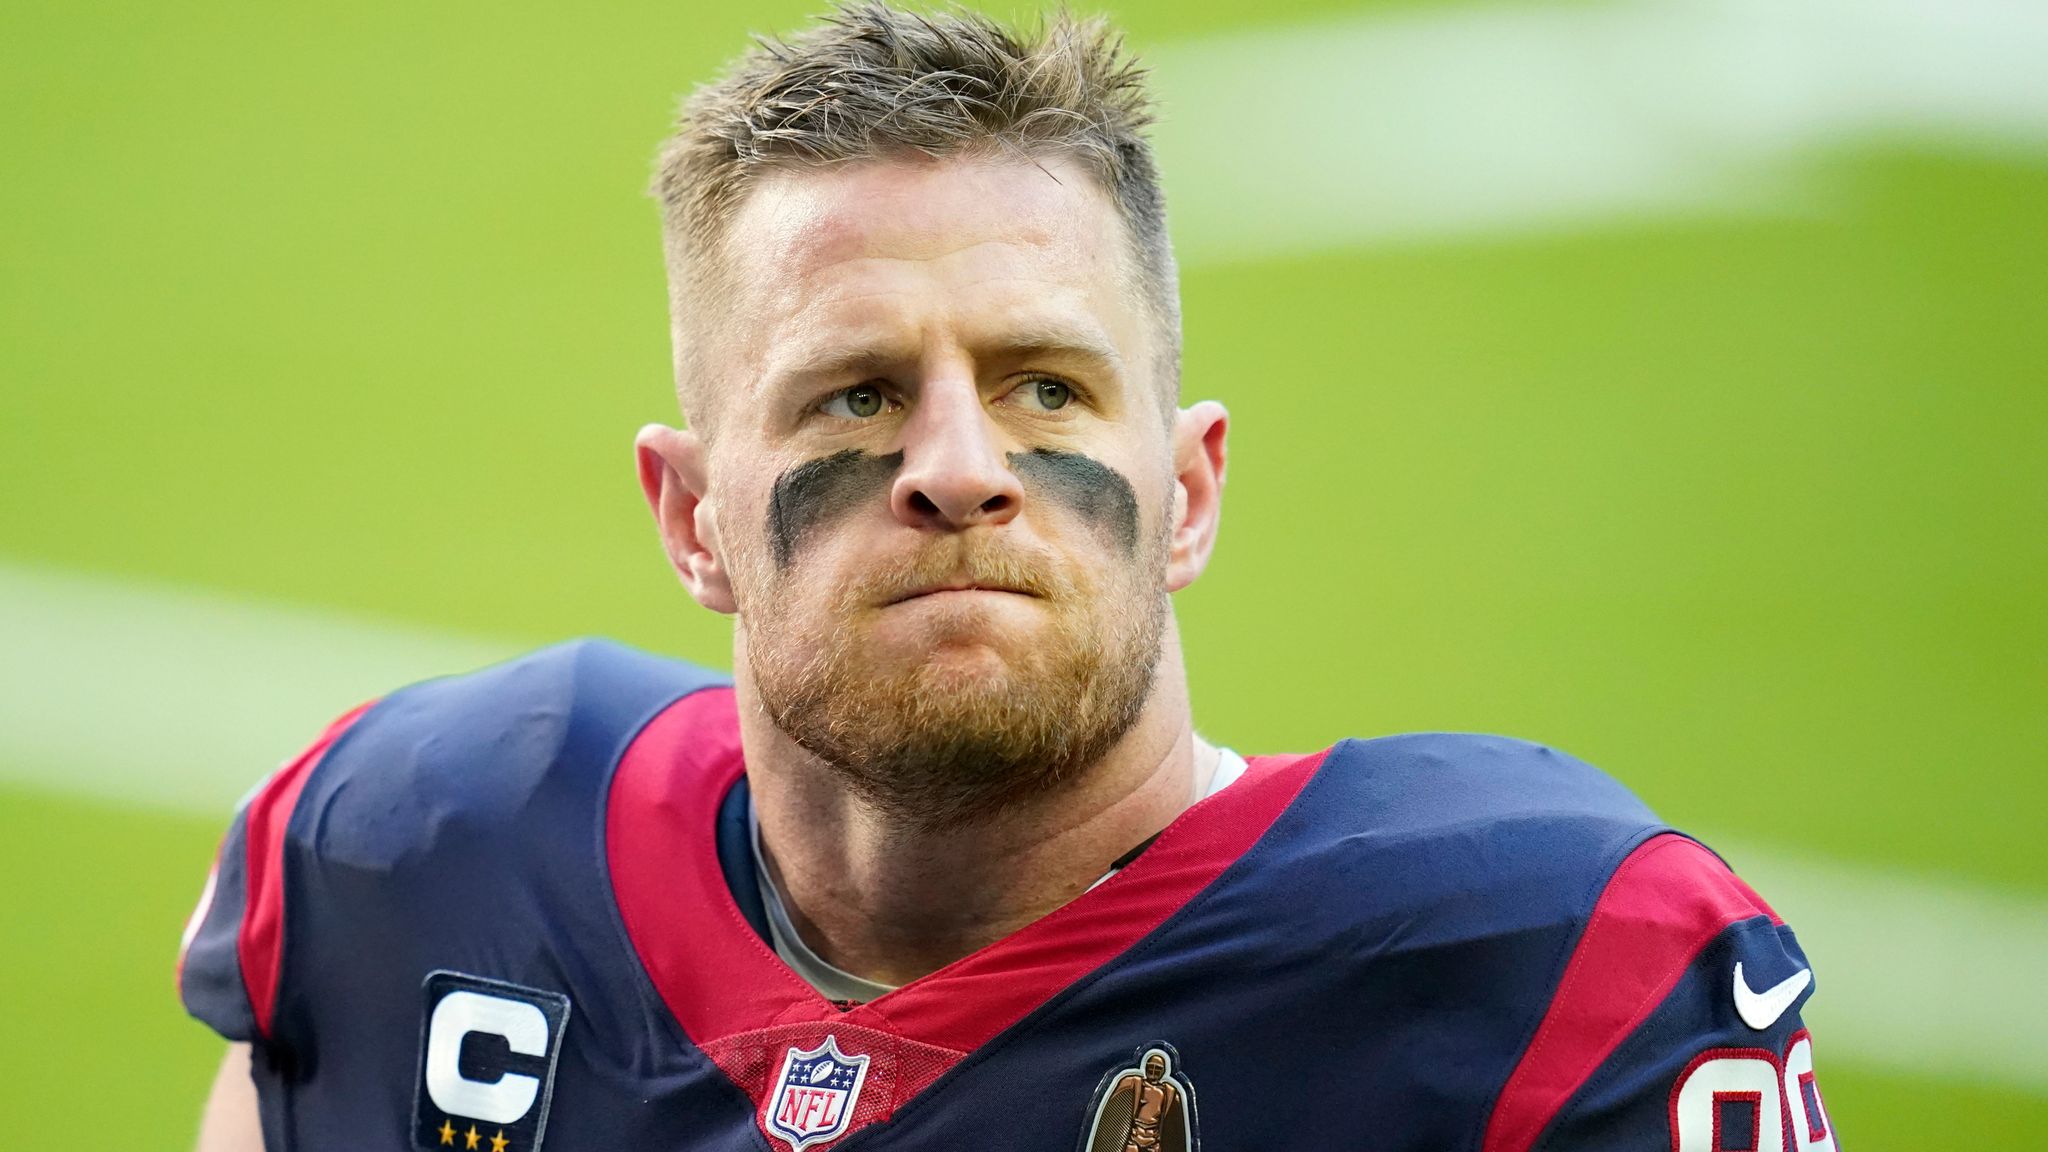 J.J. Watt, Texans Stars Flex Their Power in Getting Preseason Game  Canceled: Common Righteous Sense Finally Wins Out in NFL